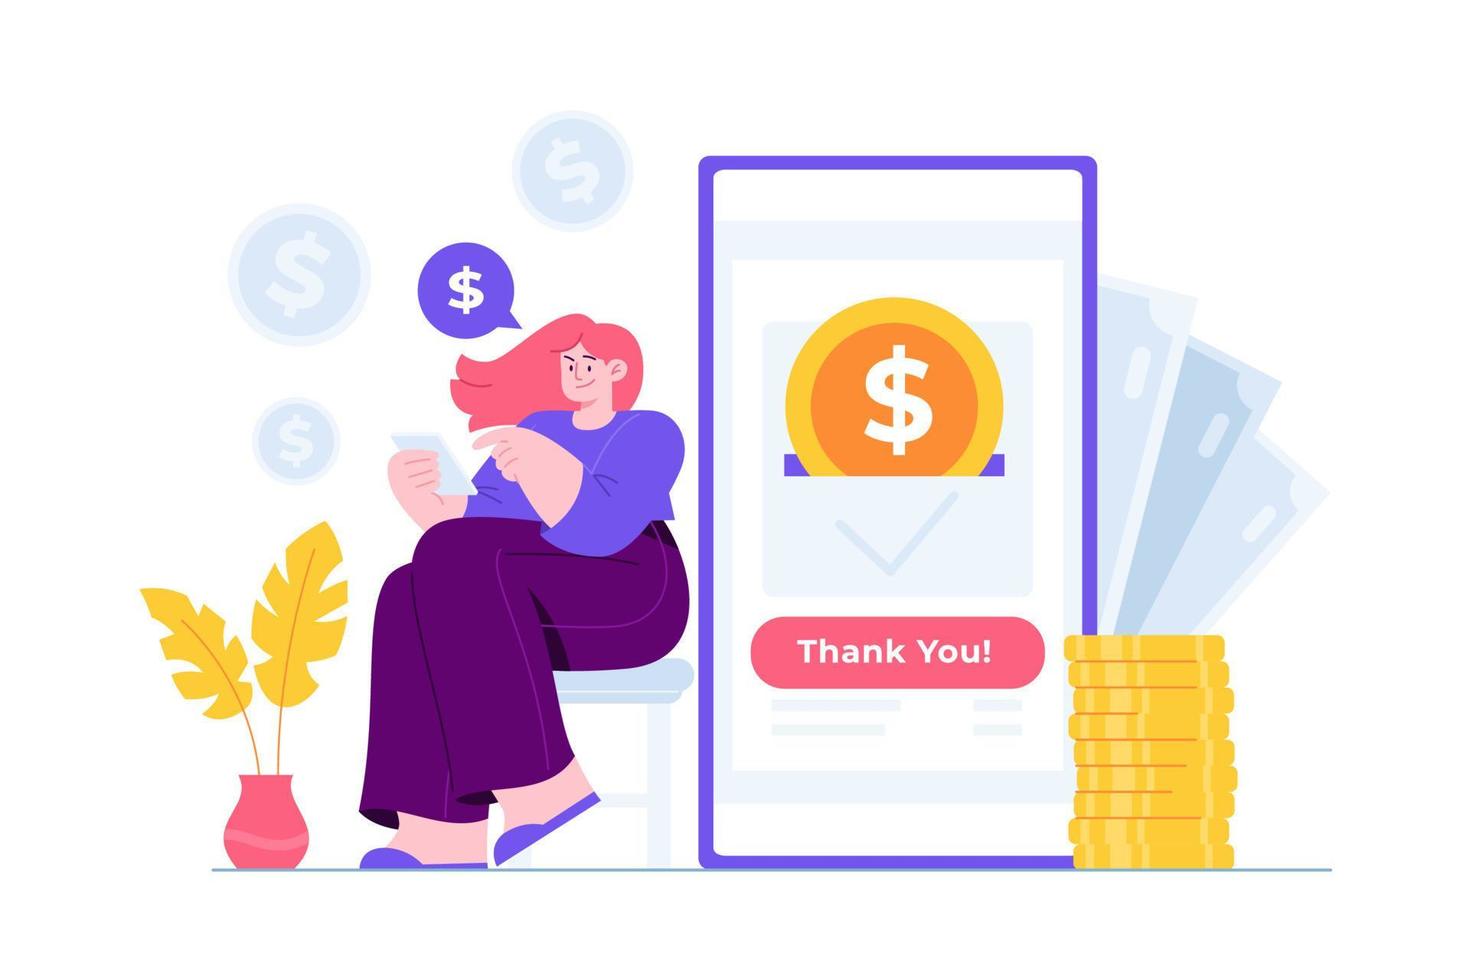 Online Mobile Payment concept vector Illustration idea for landing page template, secure transaction for purchase in e-commerce using smart bank terminal, technology, Hand drawn Flat Styles